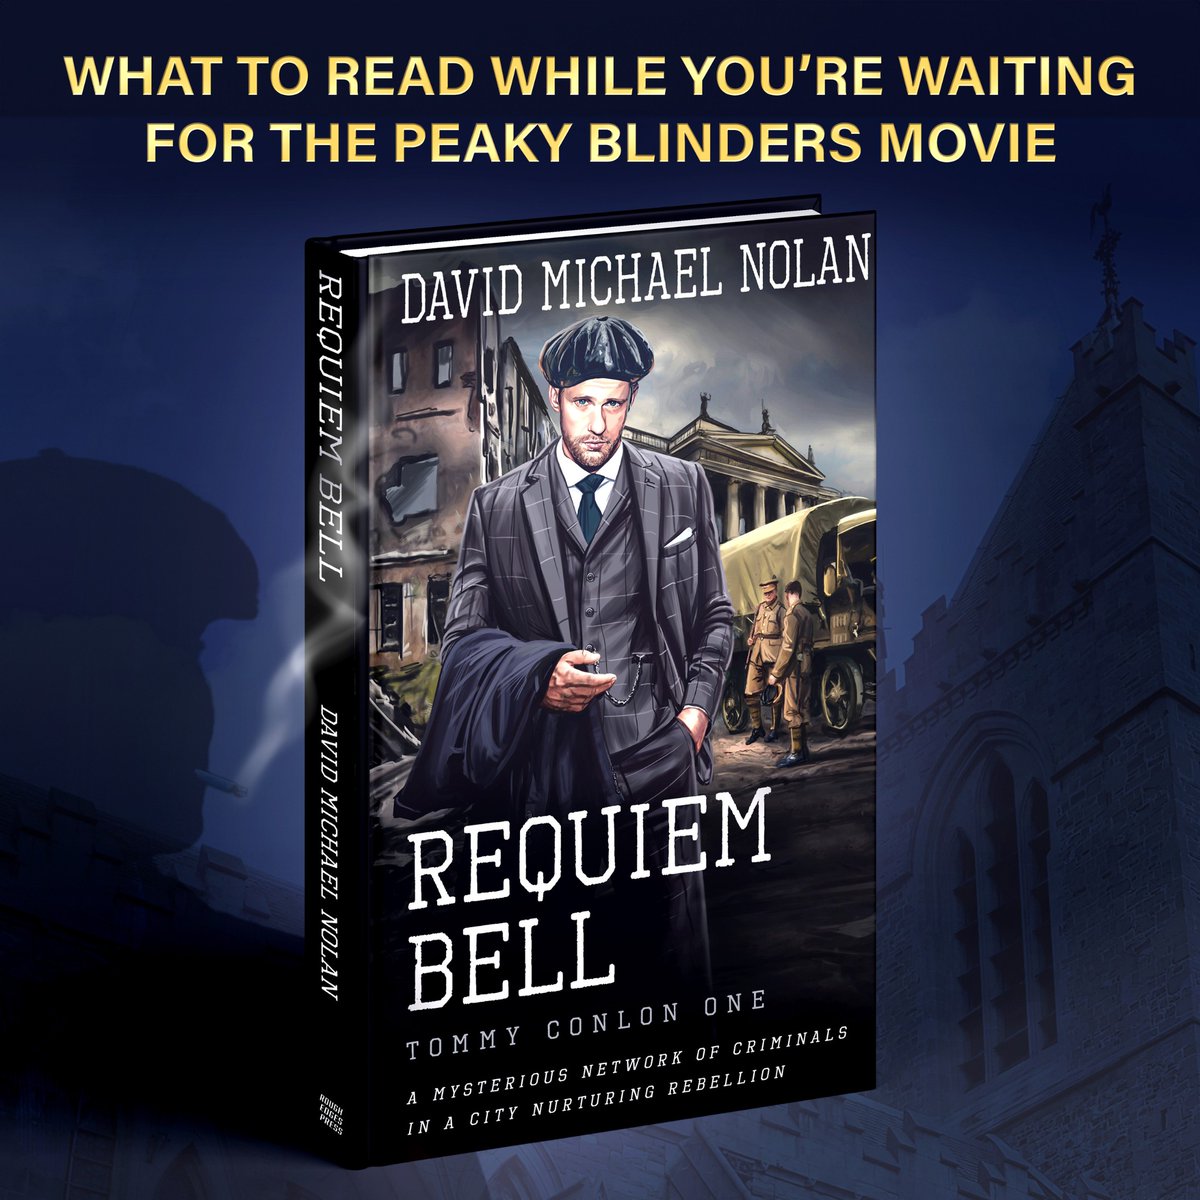 Awaiting the Peaky Blinders movie and need something to hold you over? Meet Tommy Conlon in 'Requiem Bell' - a Dublin tale of rebellion and shadows. 

Available on Amazon.#HistoricalCrime #RoughEdgesPress